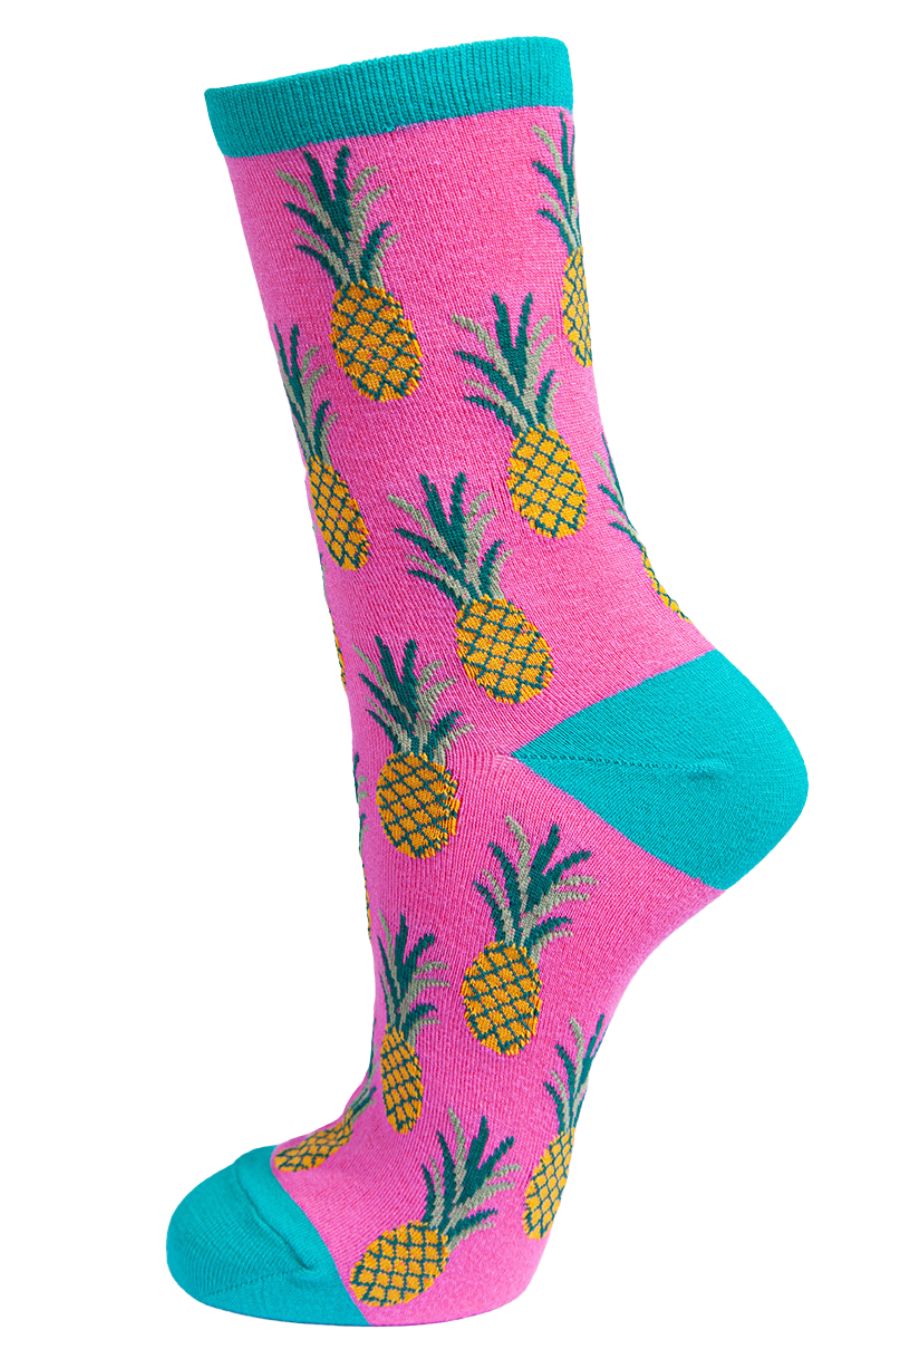 pink ankle socks, blue toe, heel and trim with all over yellow pineapple print